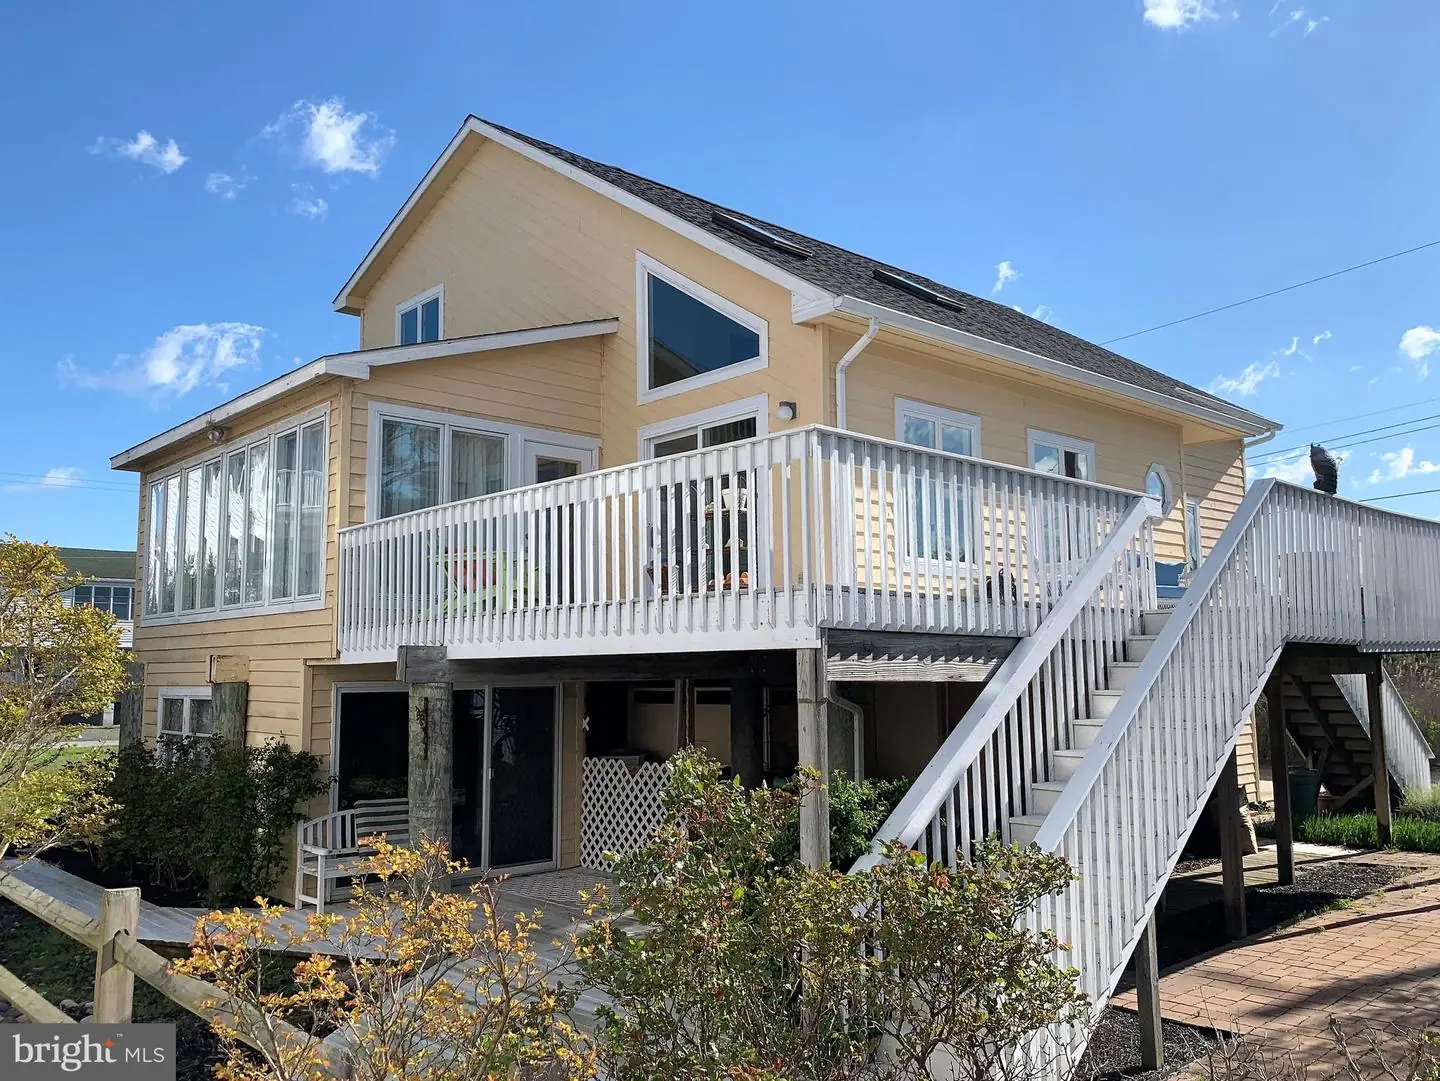 DESU164670-304207560373-2021-07-17-02-03-16 35199 Hassell Ave | Bethany Beach, DE Real Estate For Sale | MLS# Desu164670  - 1st Choice Properties